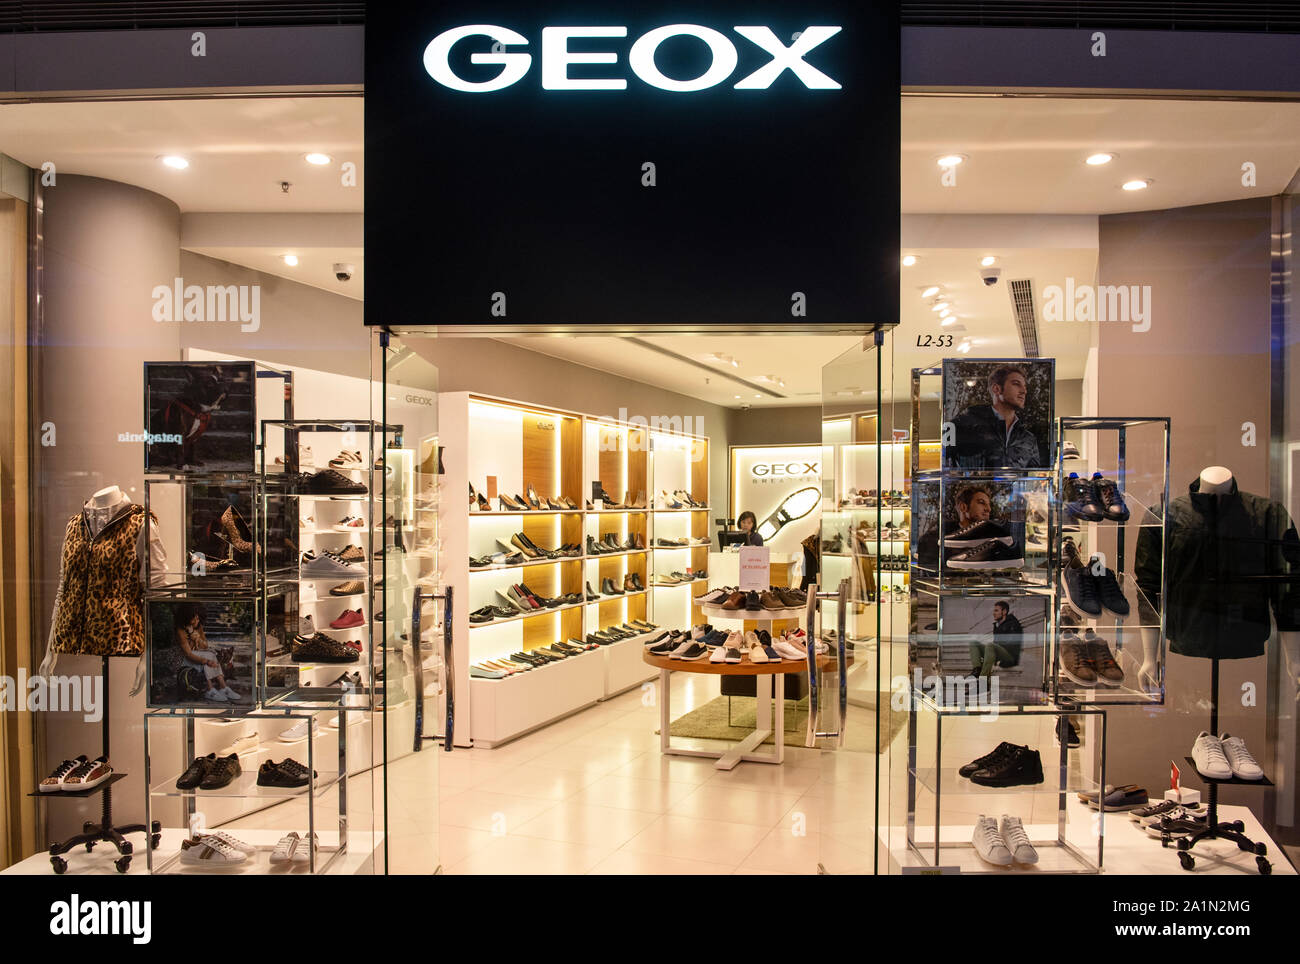 Geox Store High Resolution Stock Photography and Images - Alamy